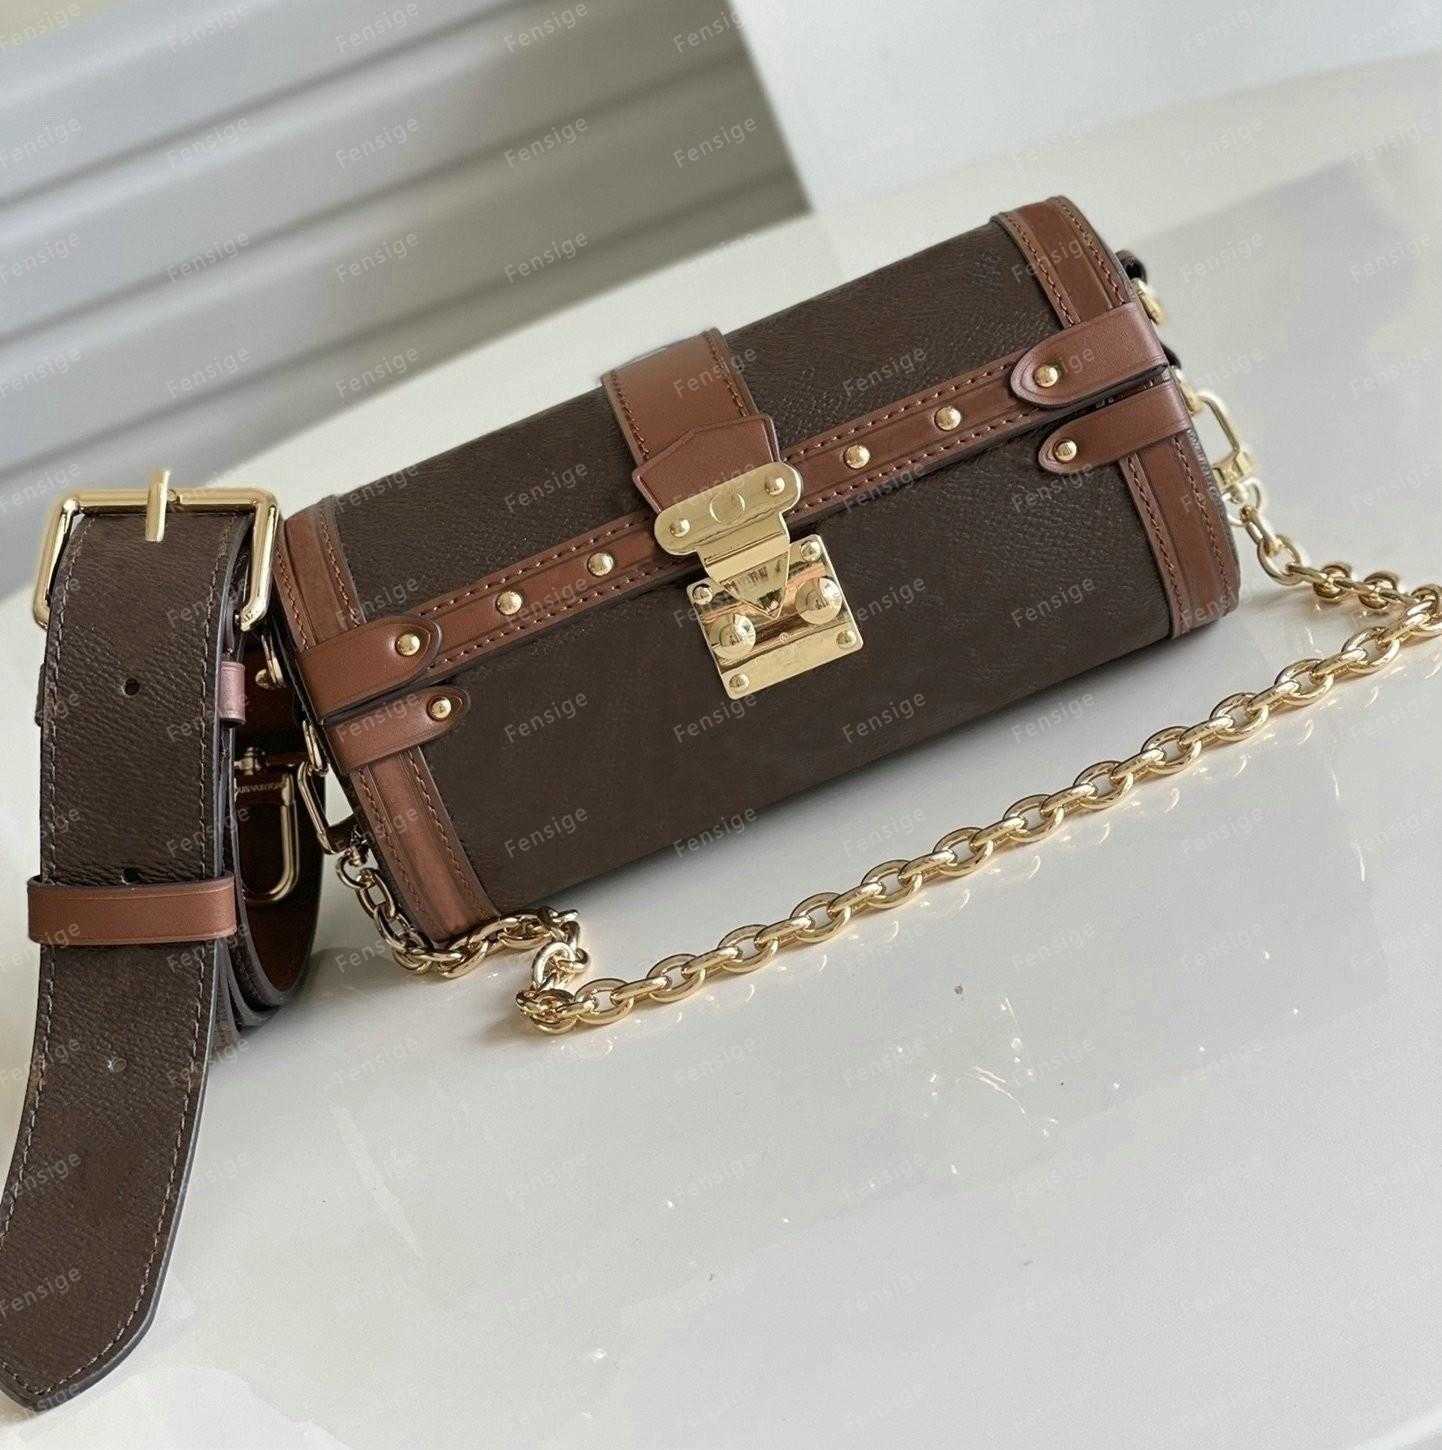 Papillon Trunk Designer Leather Cylinder bags M57835 Summer fashion trends Detachable strap Clutch Gold Chains two Straps Mini Cross Body Bag with Purse 19cm